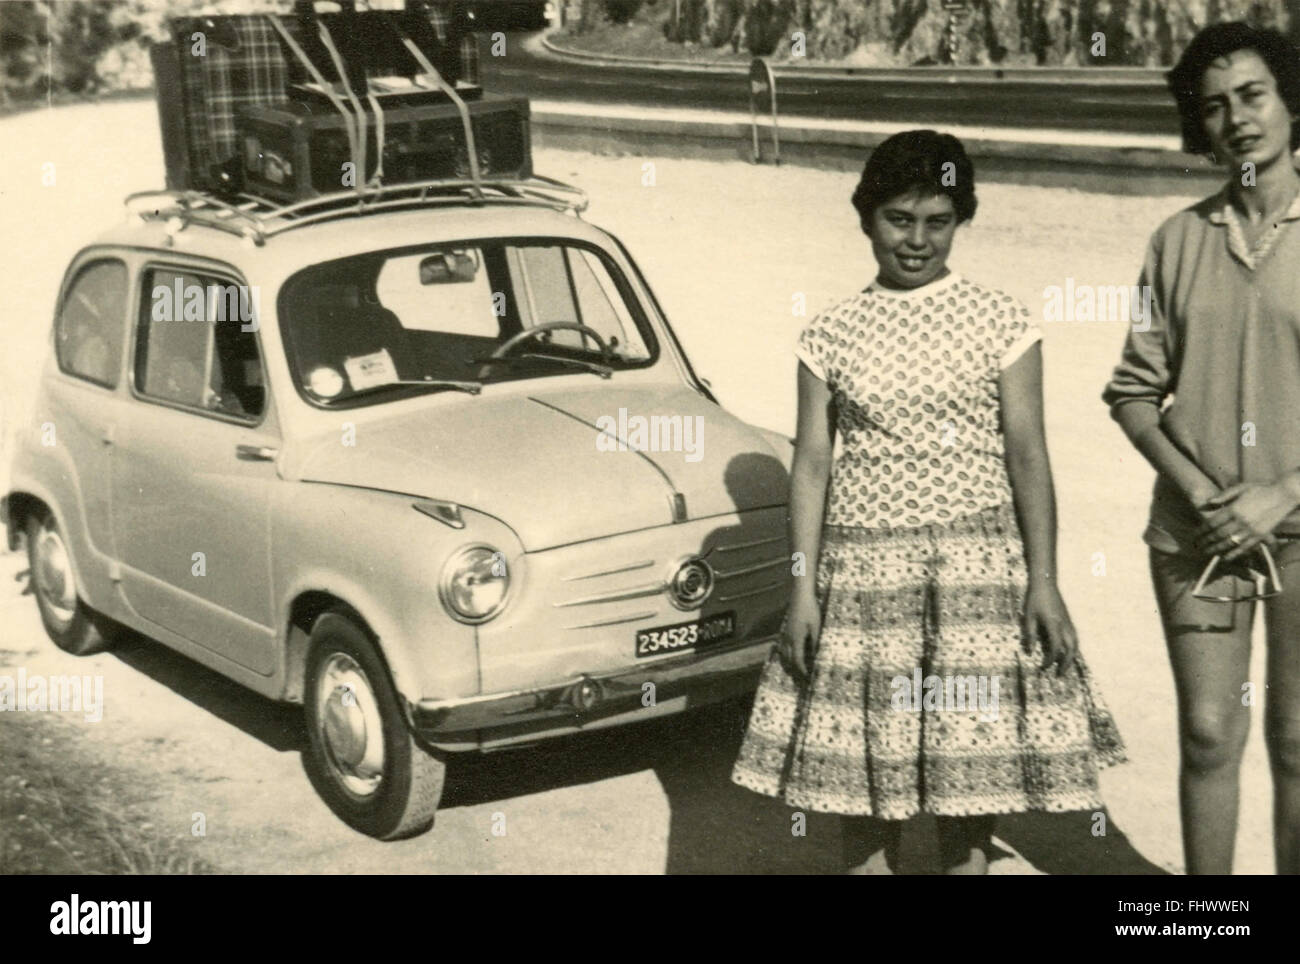 Departing with FIAT 600 loads of suitcases, Italy Stock Photo